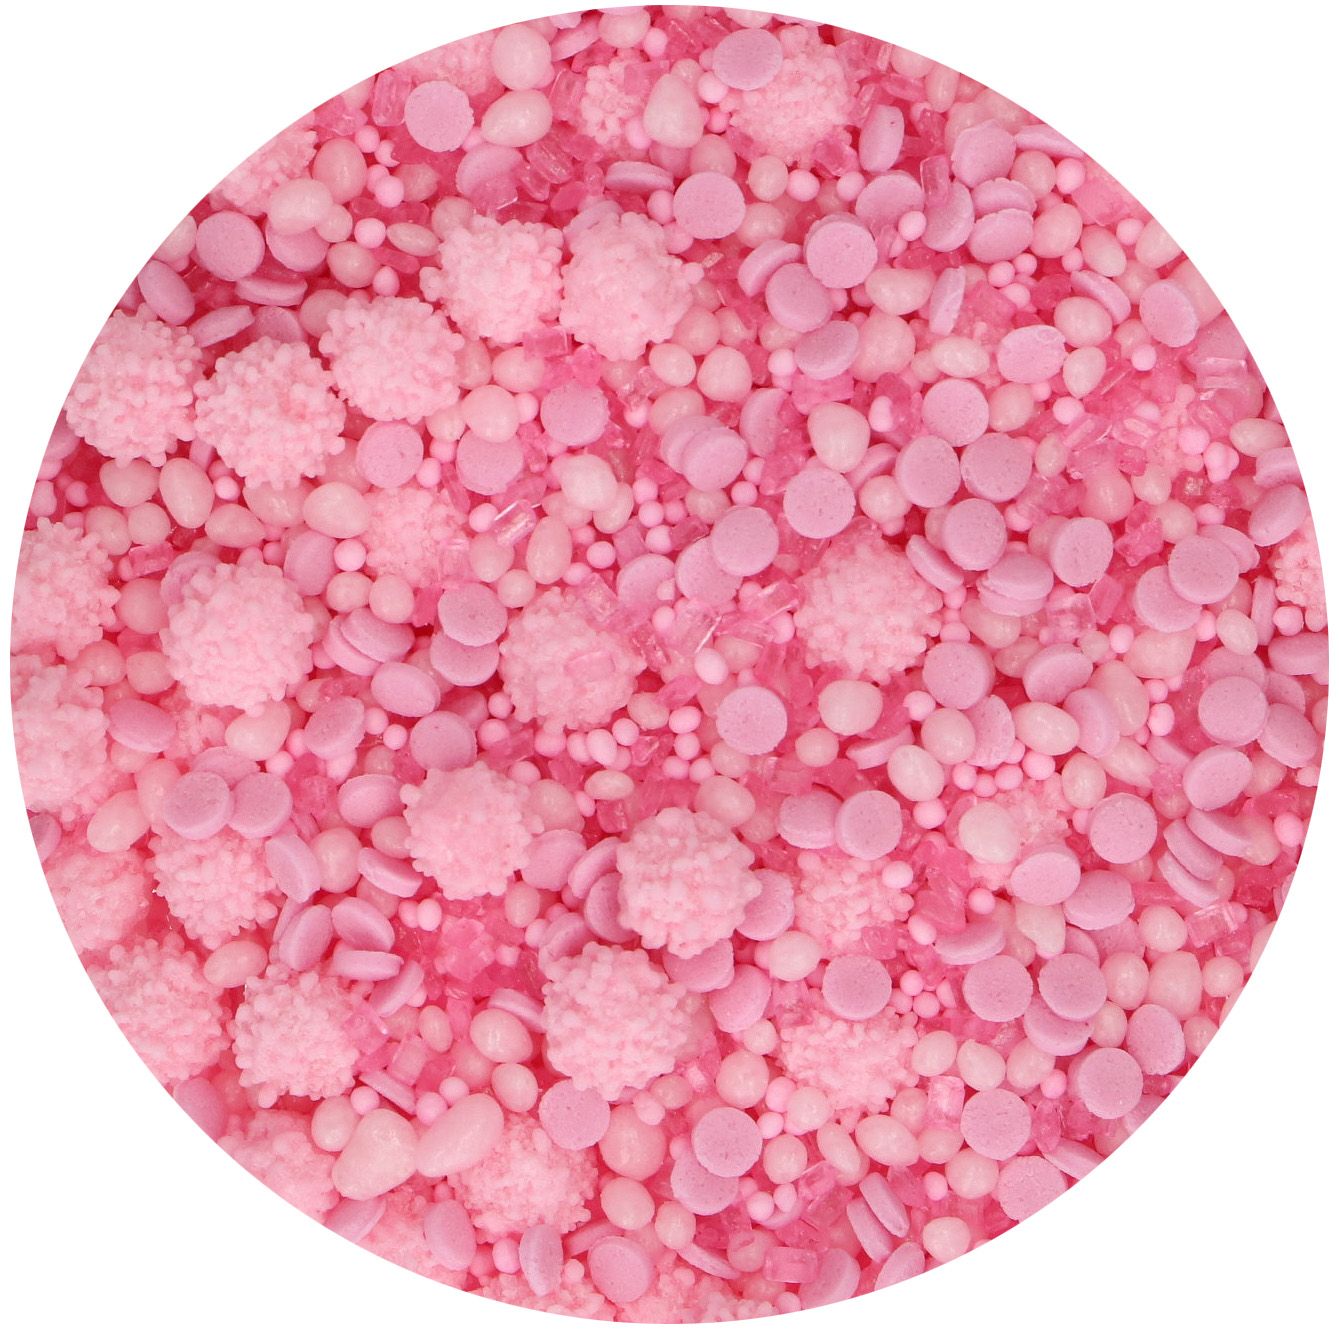 Posyp Fun Cakes - Sprinkle Medley - Pink 70g, F53305